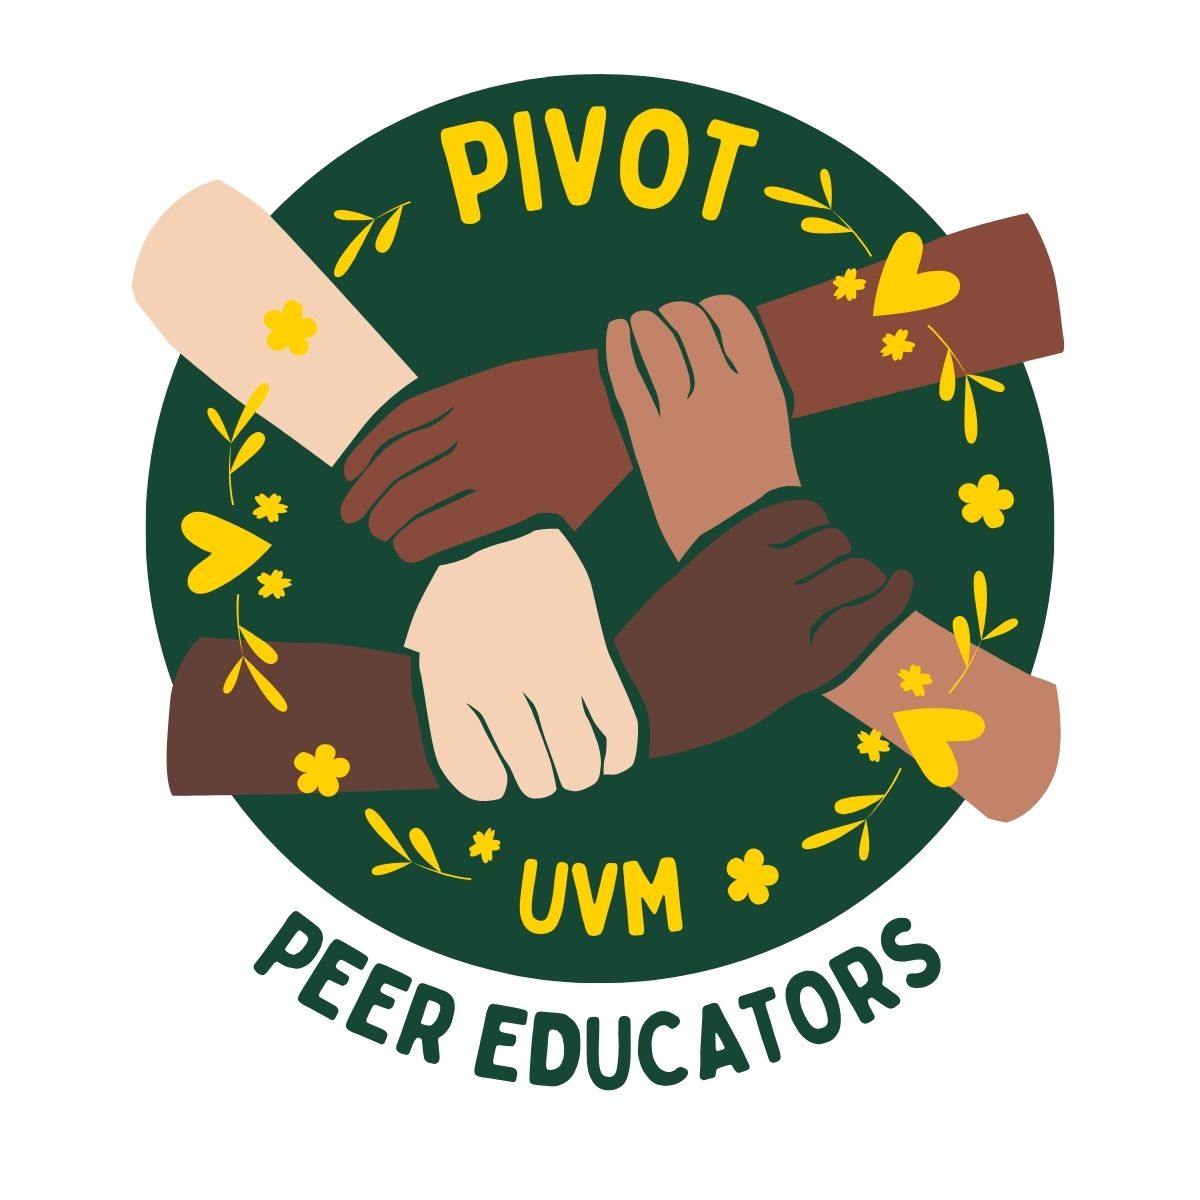 Logo with "PIVOT Peer Educators" written in yellow on green circle background with four hands in a square each gripping the wrist of another